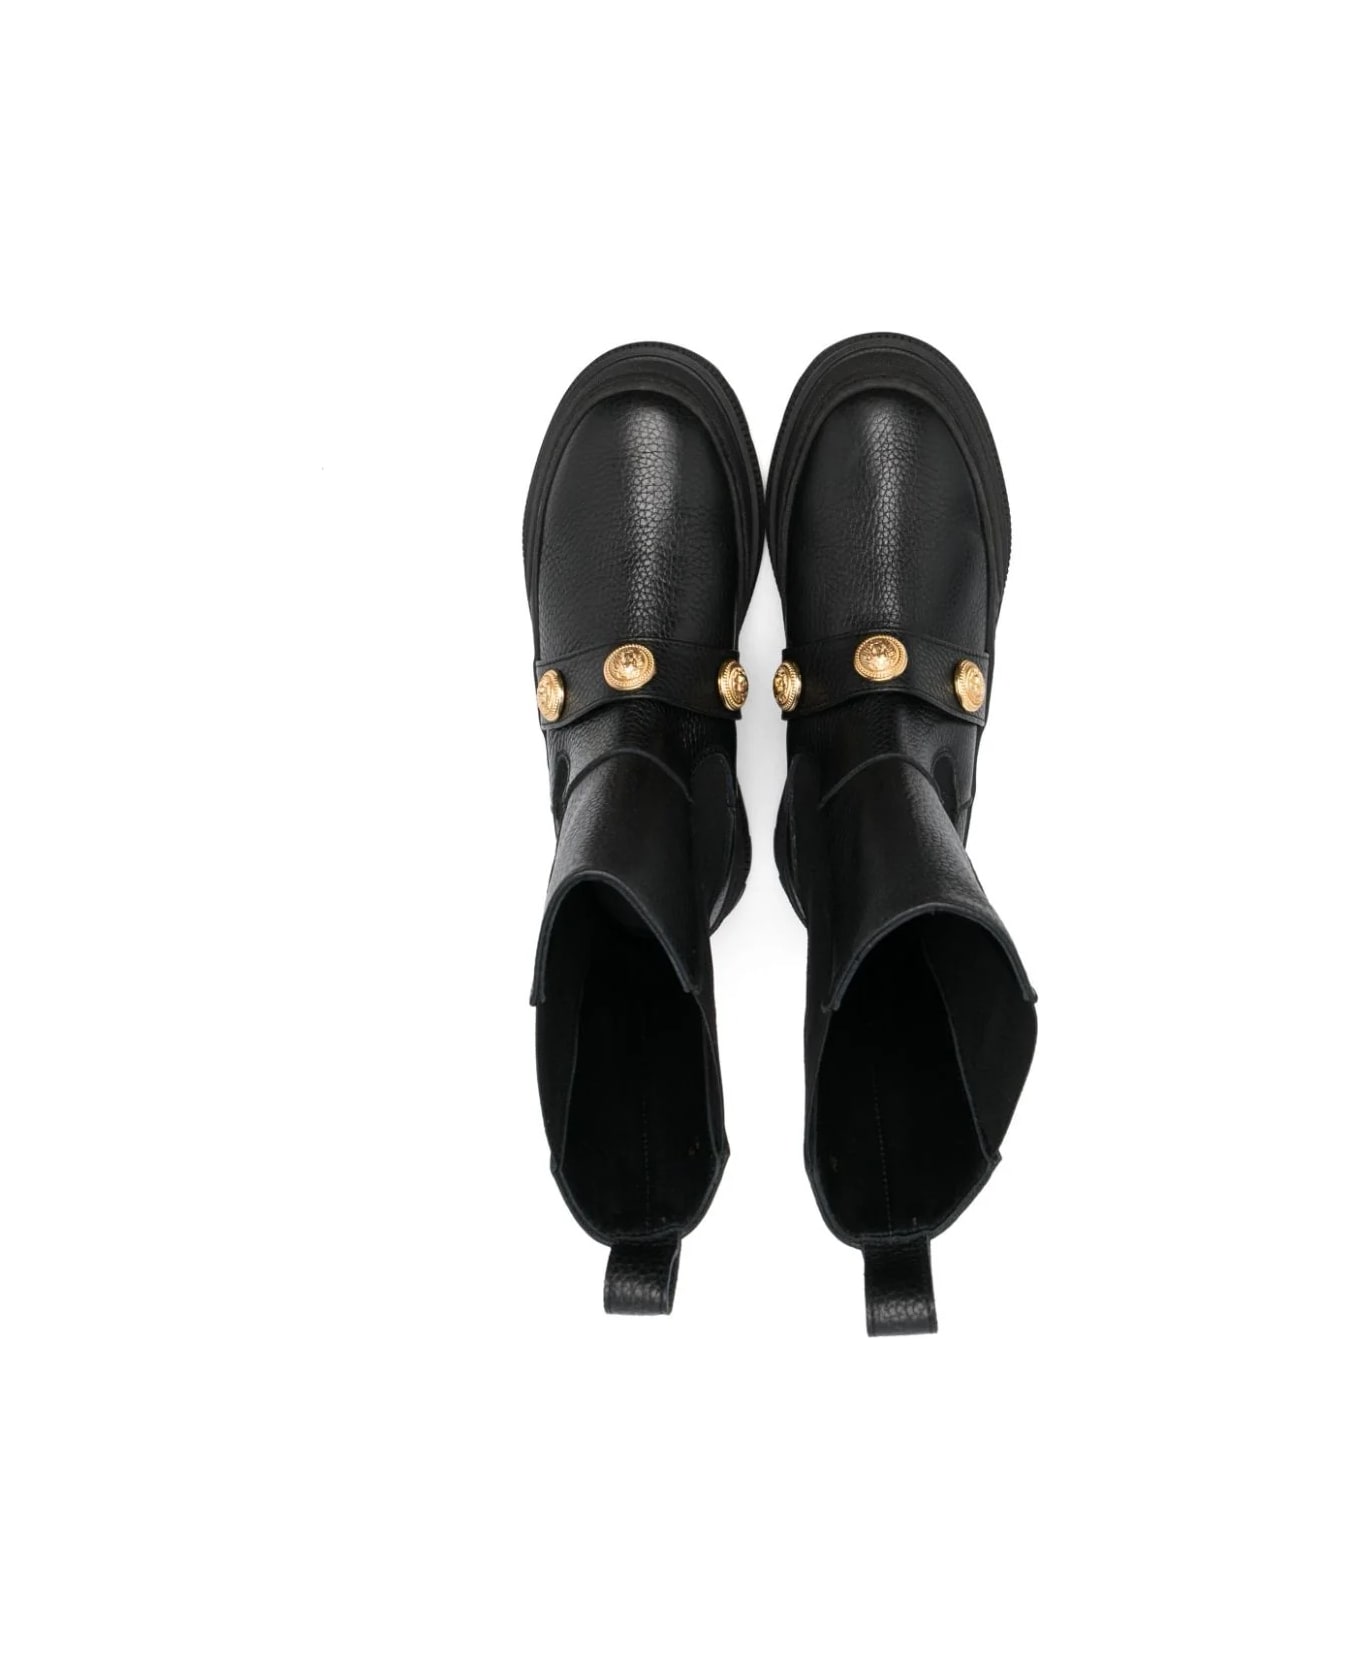 Balmain Black Boots With Gold Embossed Buttons - Or